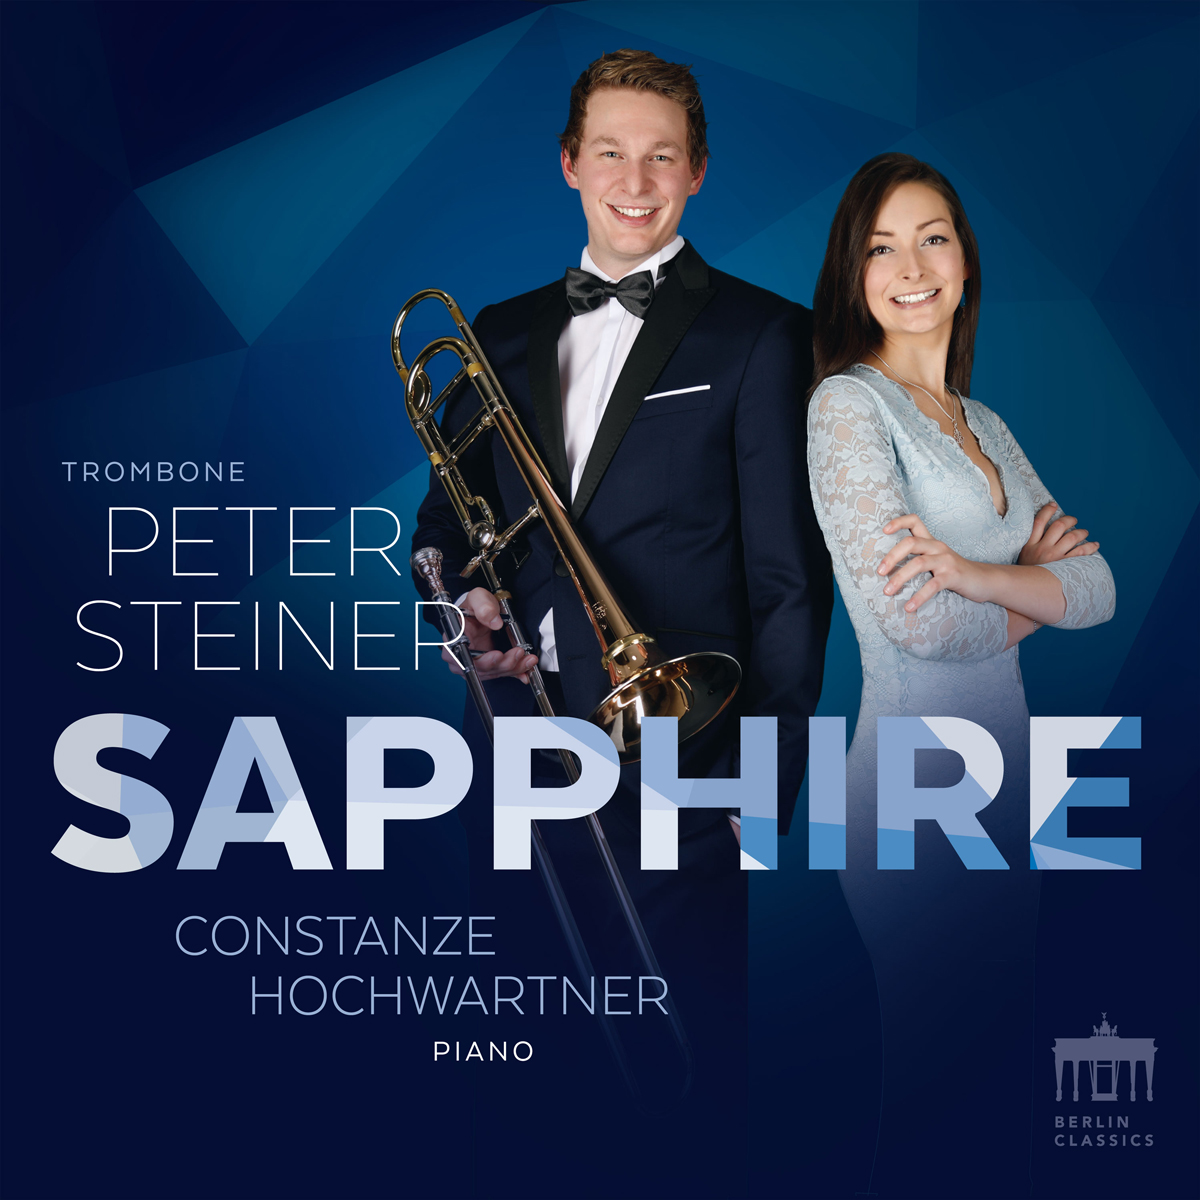 promotional graphic for a guest recital featuring Peter Steiner and Constanze Hochwartner